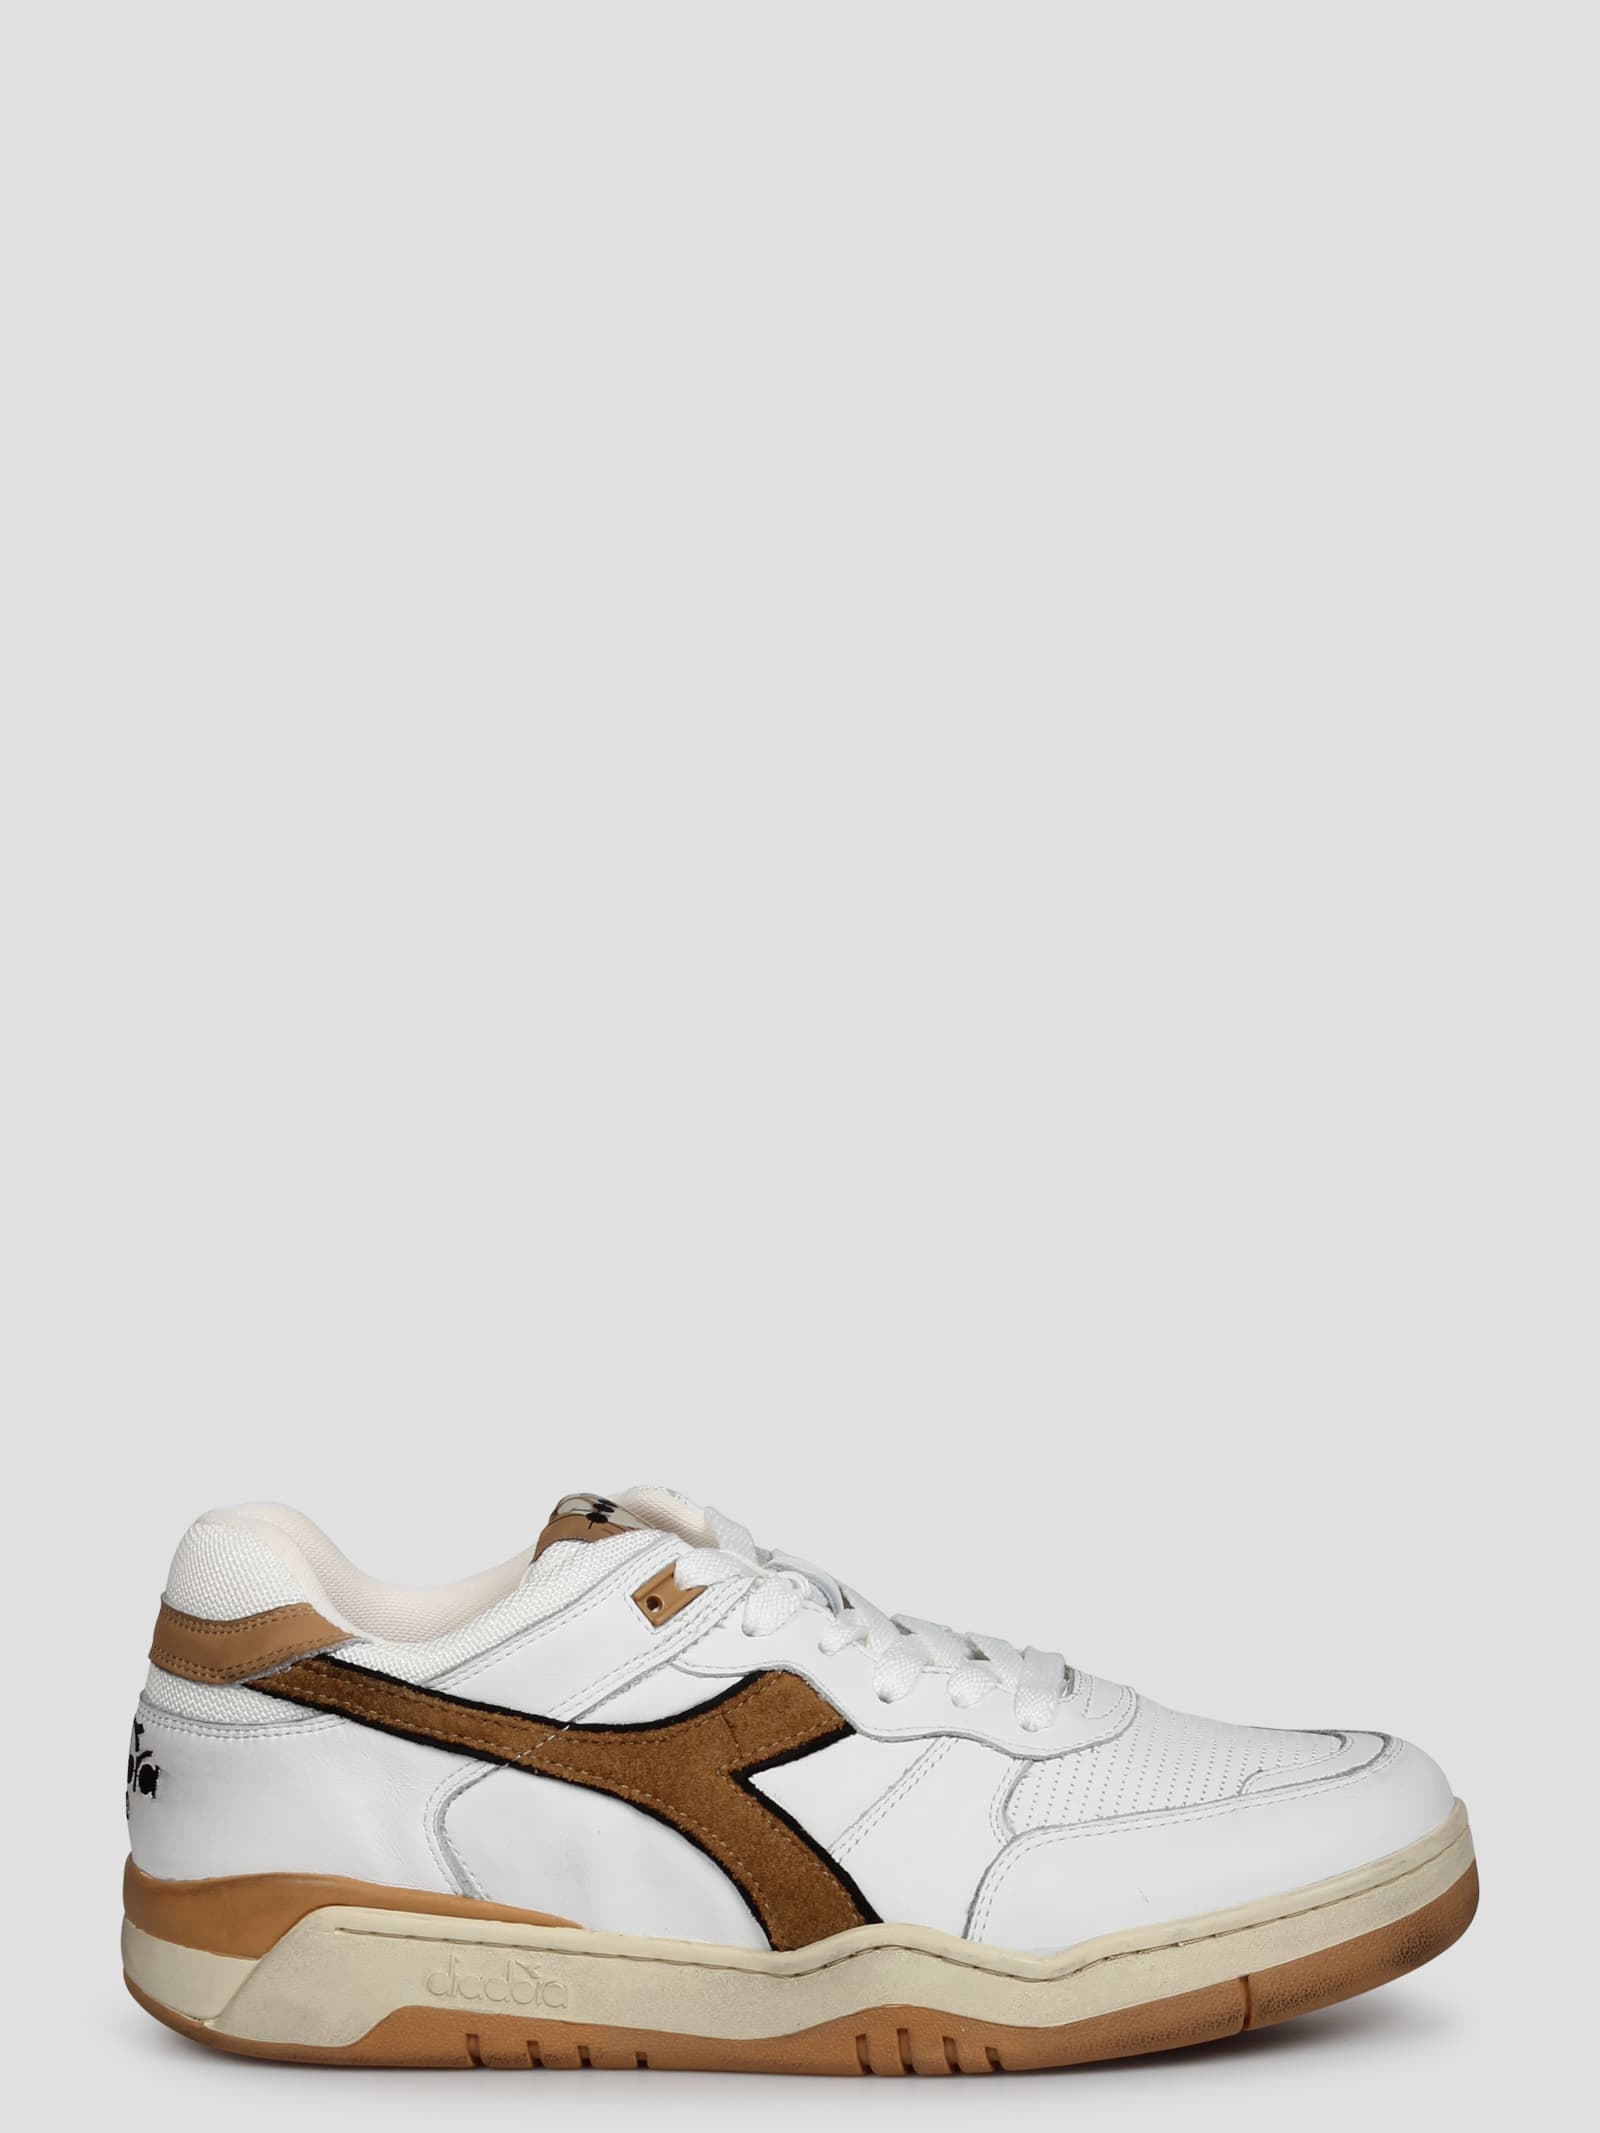 Shop Diadora B.560 Used Sneakers In White/beige